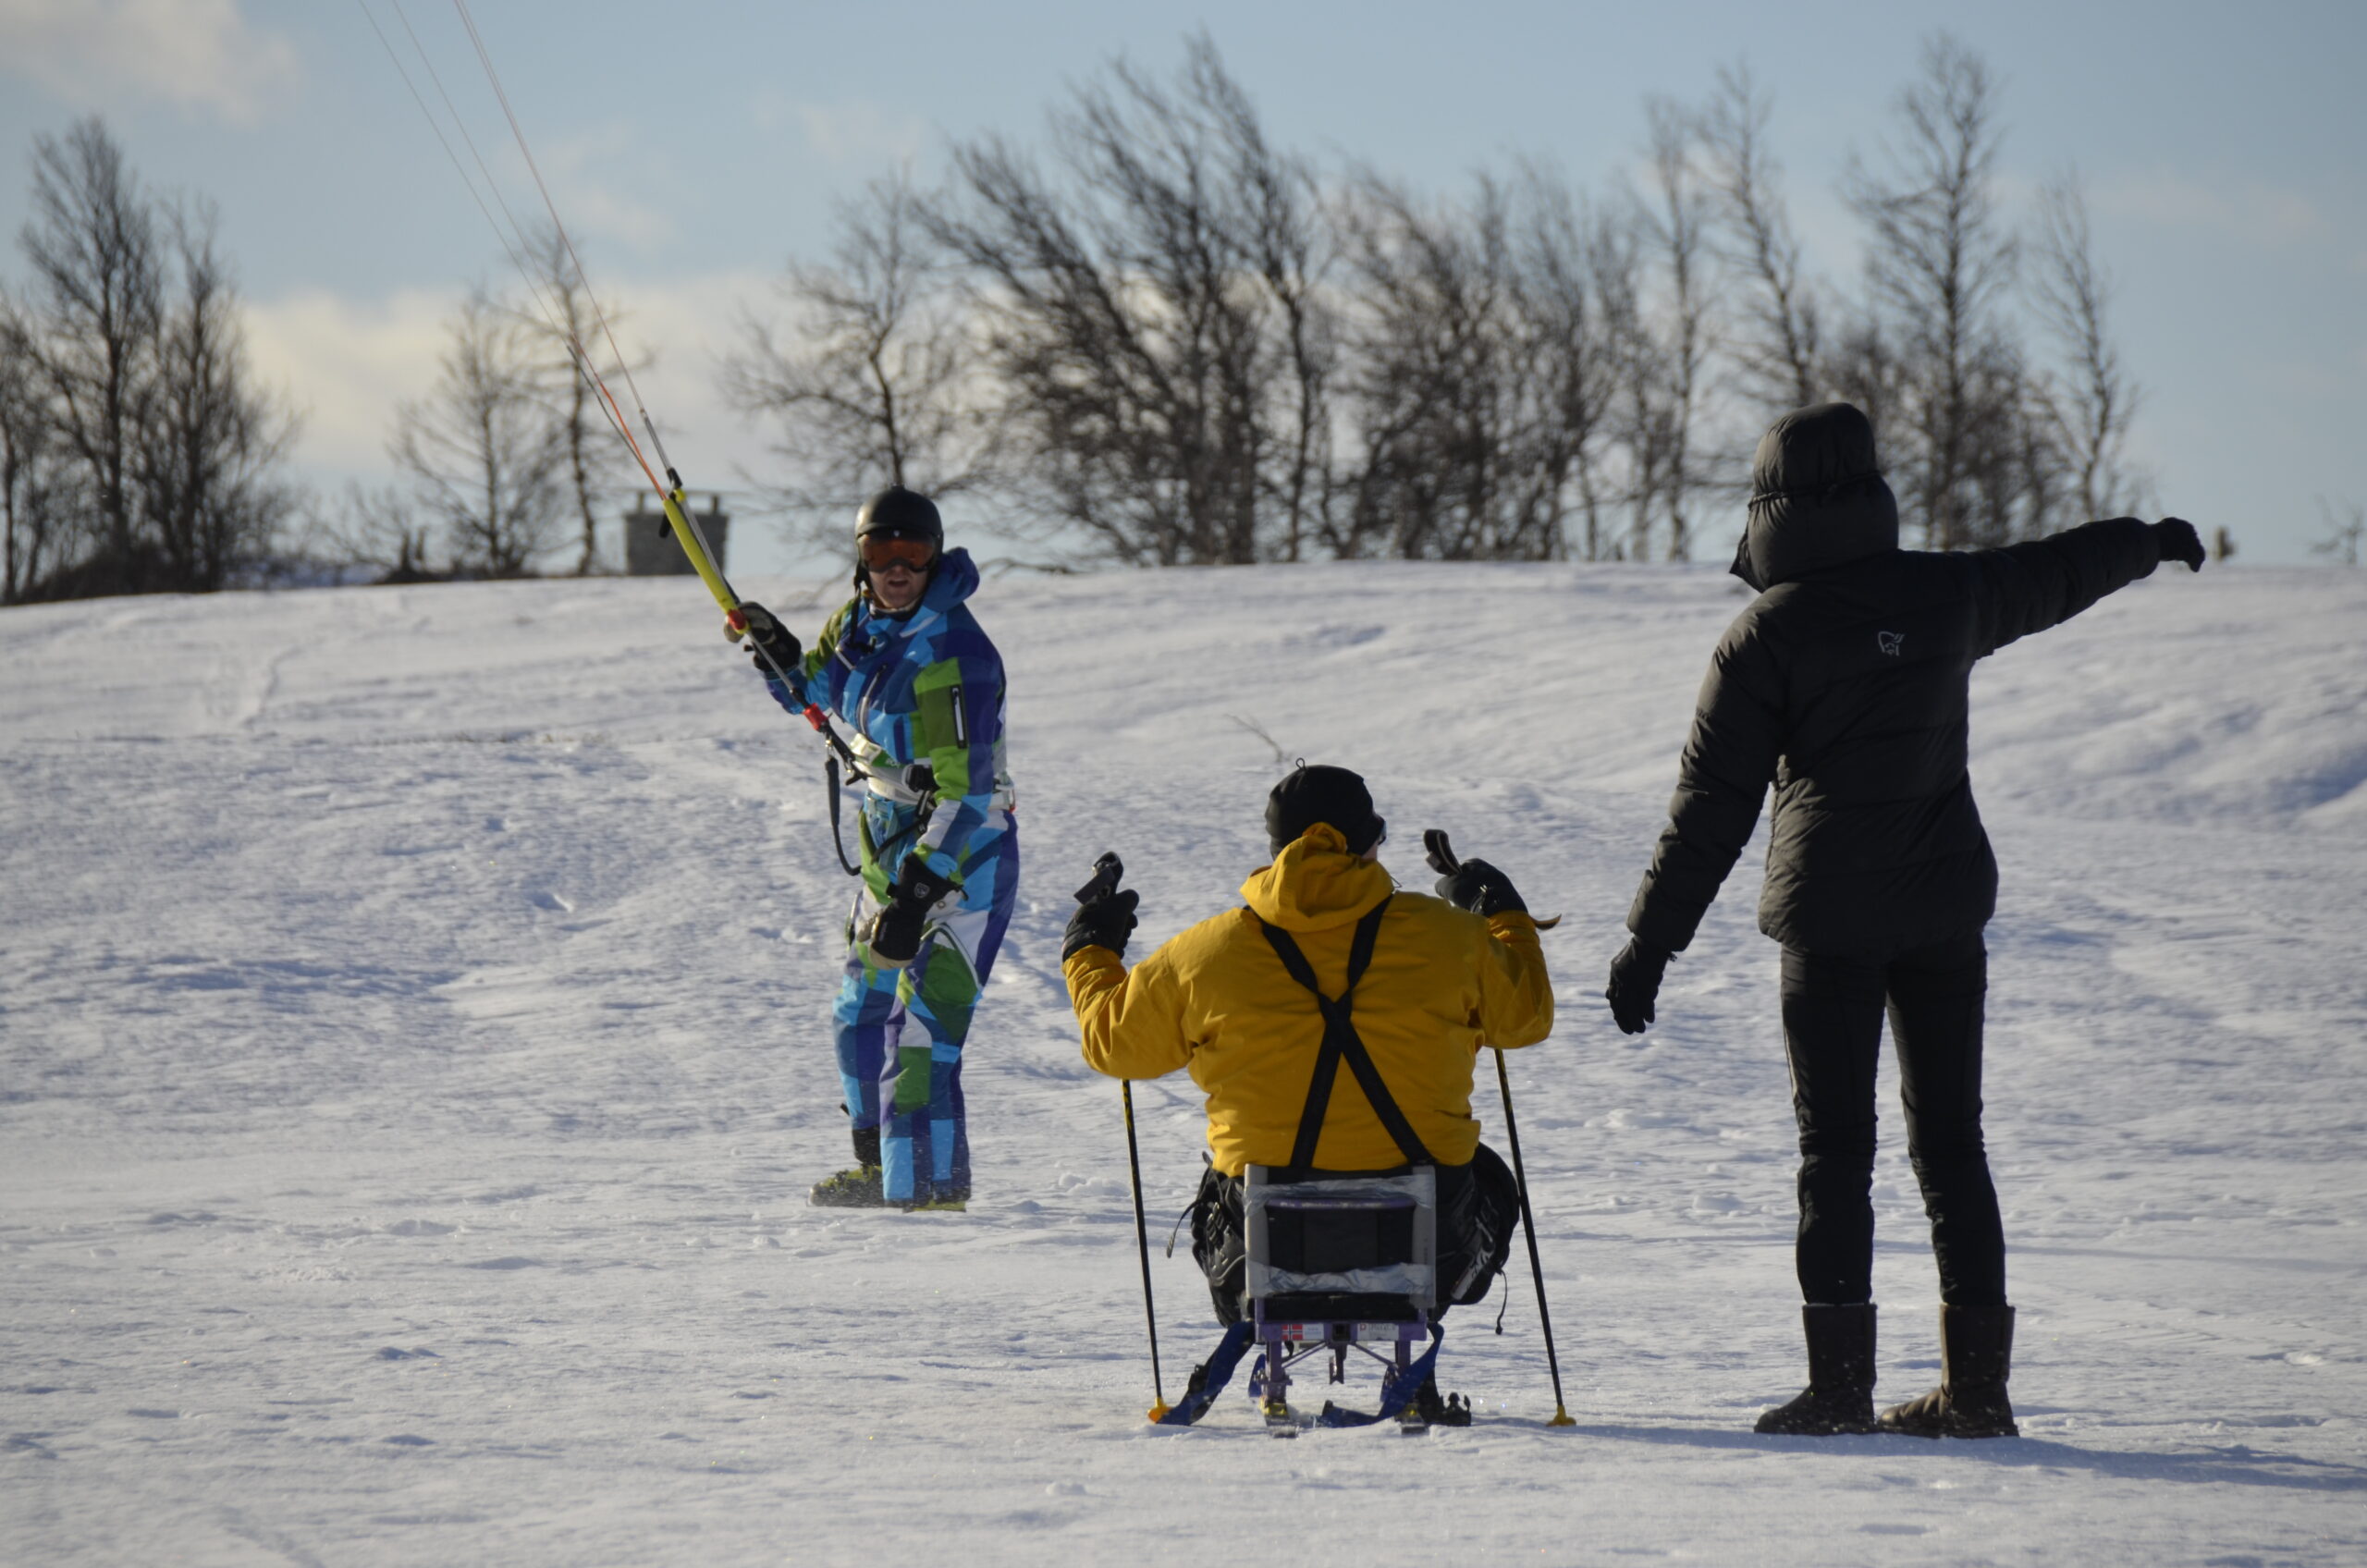 Kiting instructor with sit ski participant